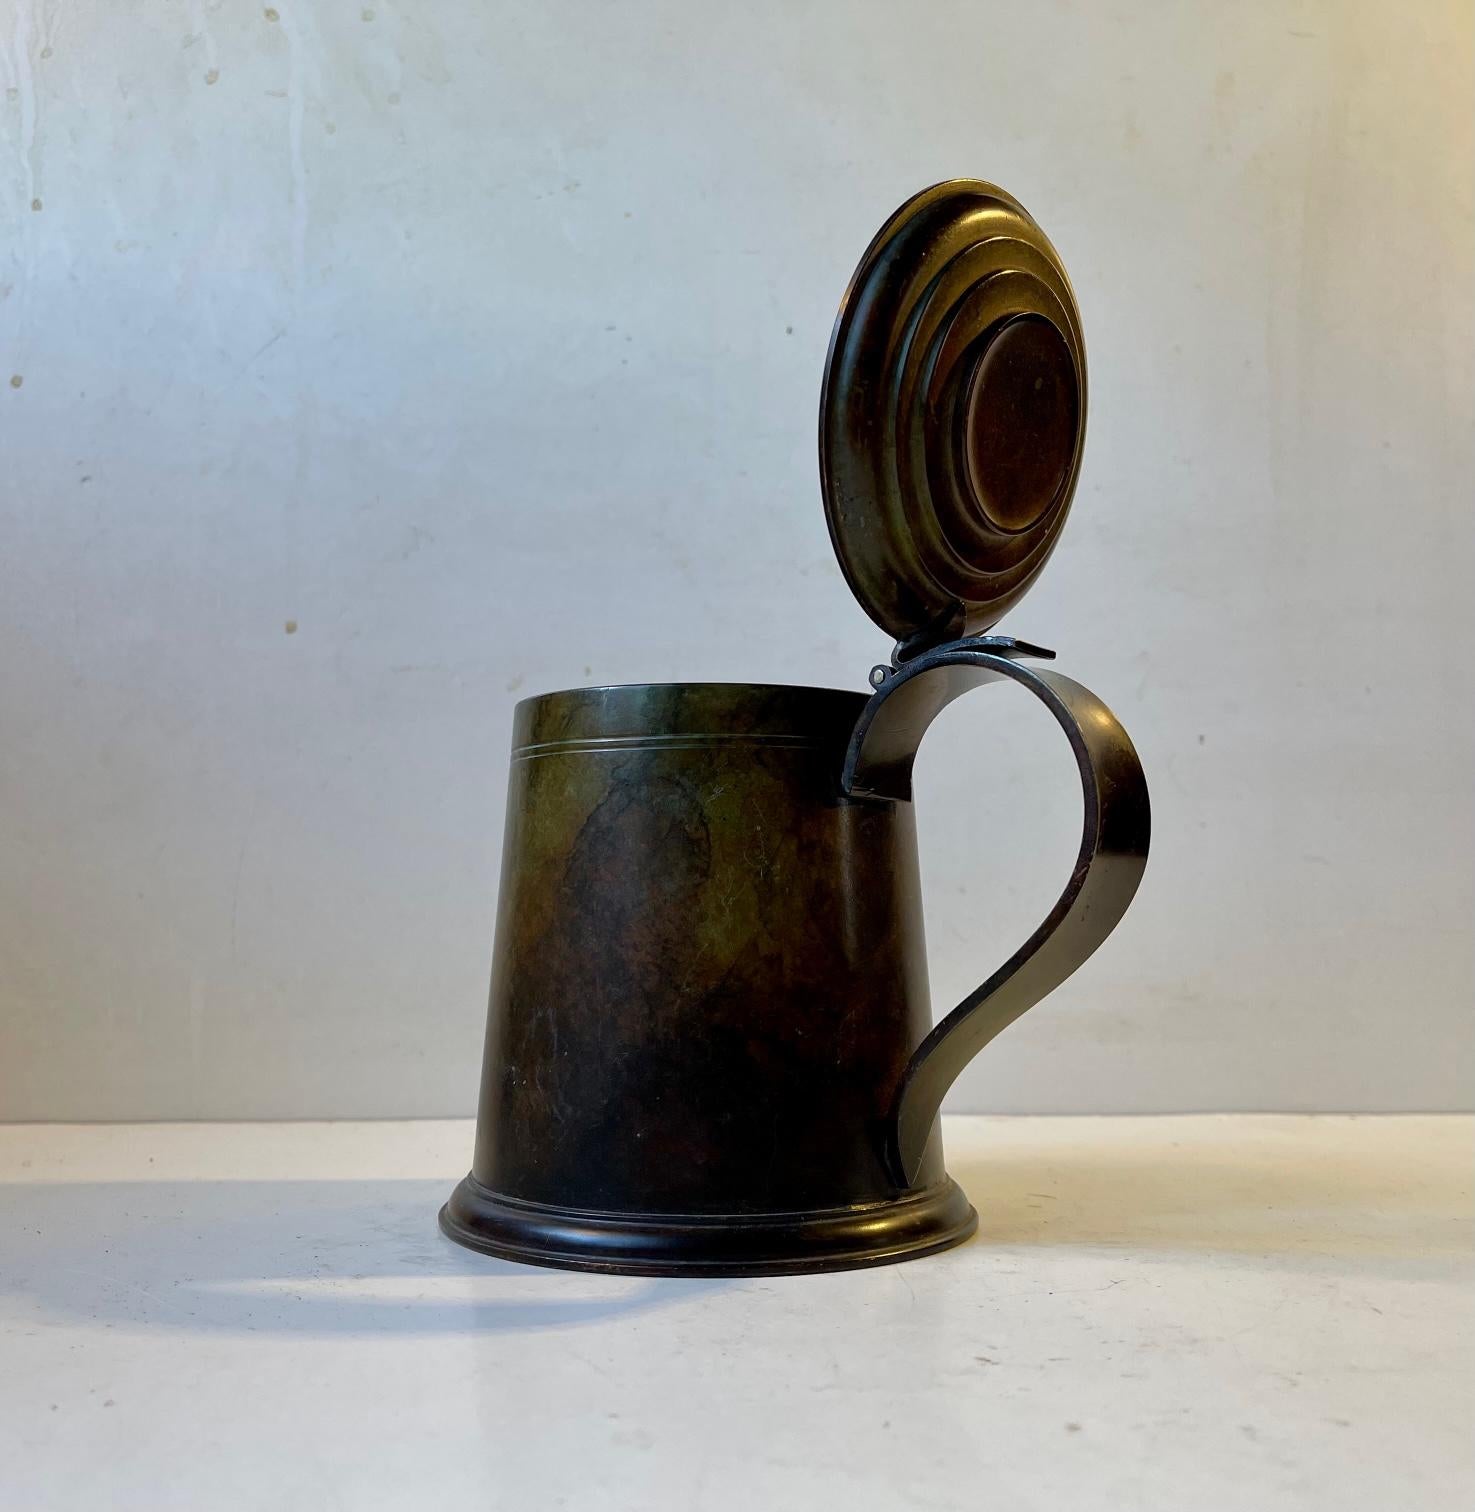 A stylish beer mug with flip-lid. Its made from verdigris patinated bronze. Probably made by Holger Fredericia - HF Ildfast in Denmark during the 1930s. It has no inscriptions and is wellkept. Measurements: H: 13.5 cm, Diameter: 11.5 cm. Capacity: